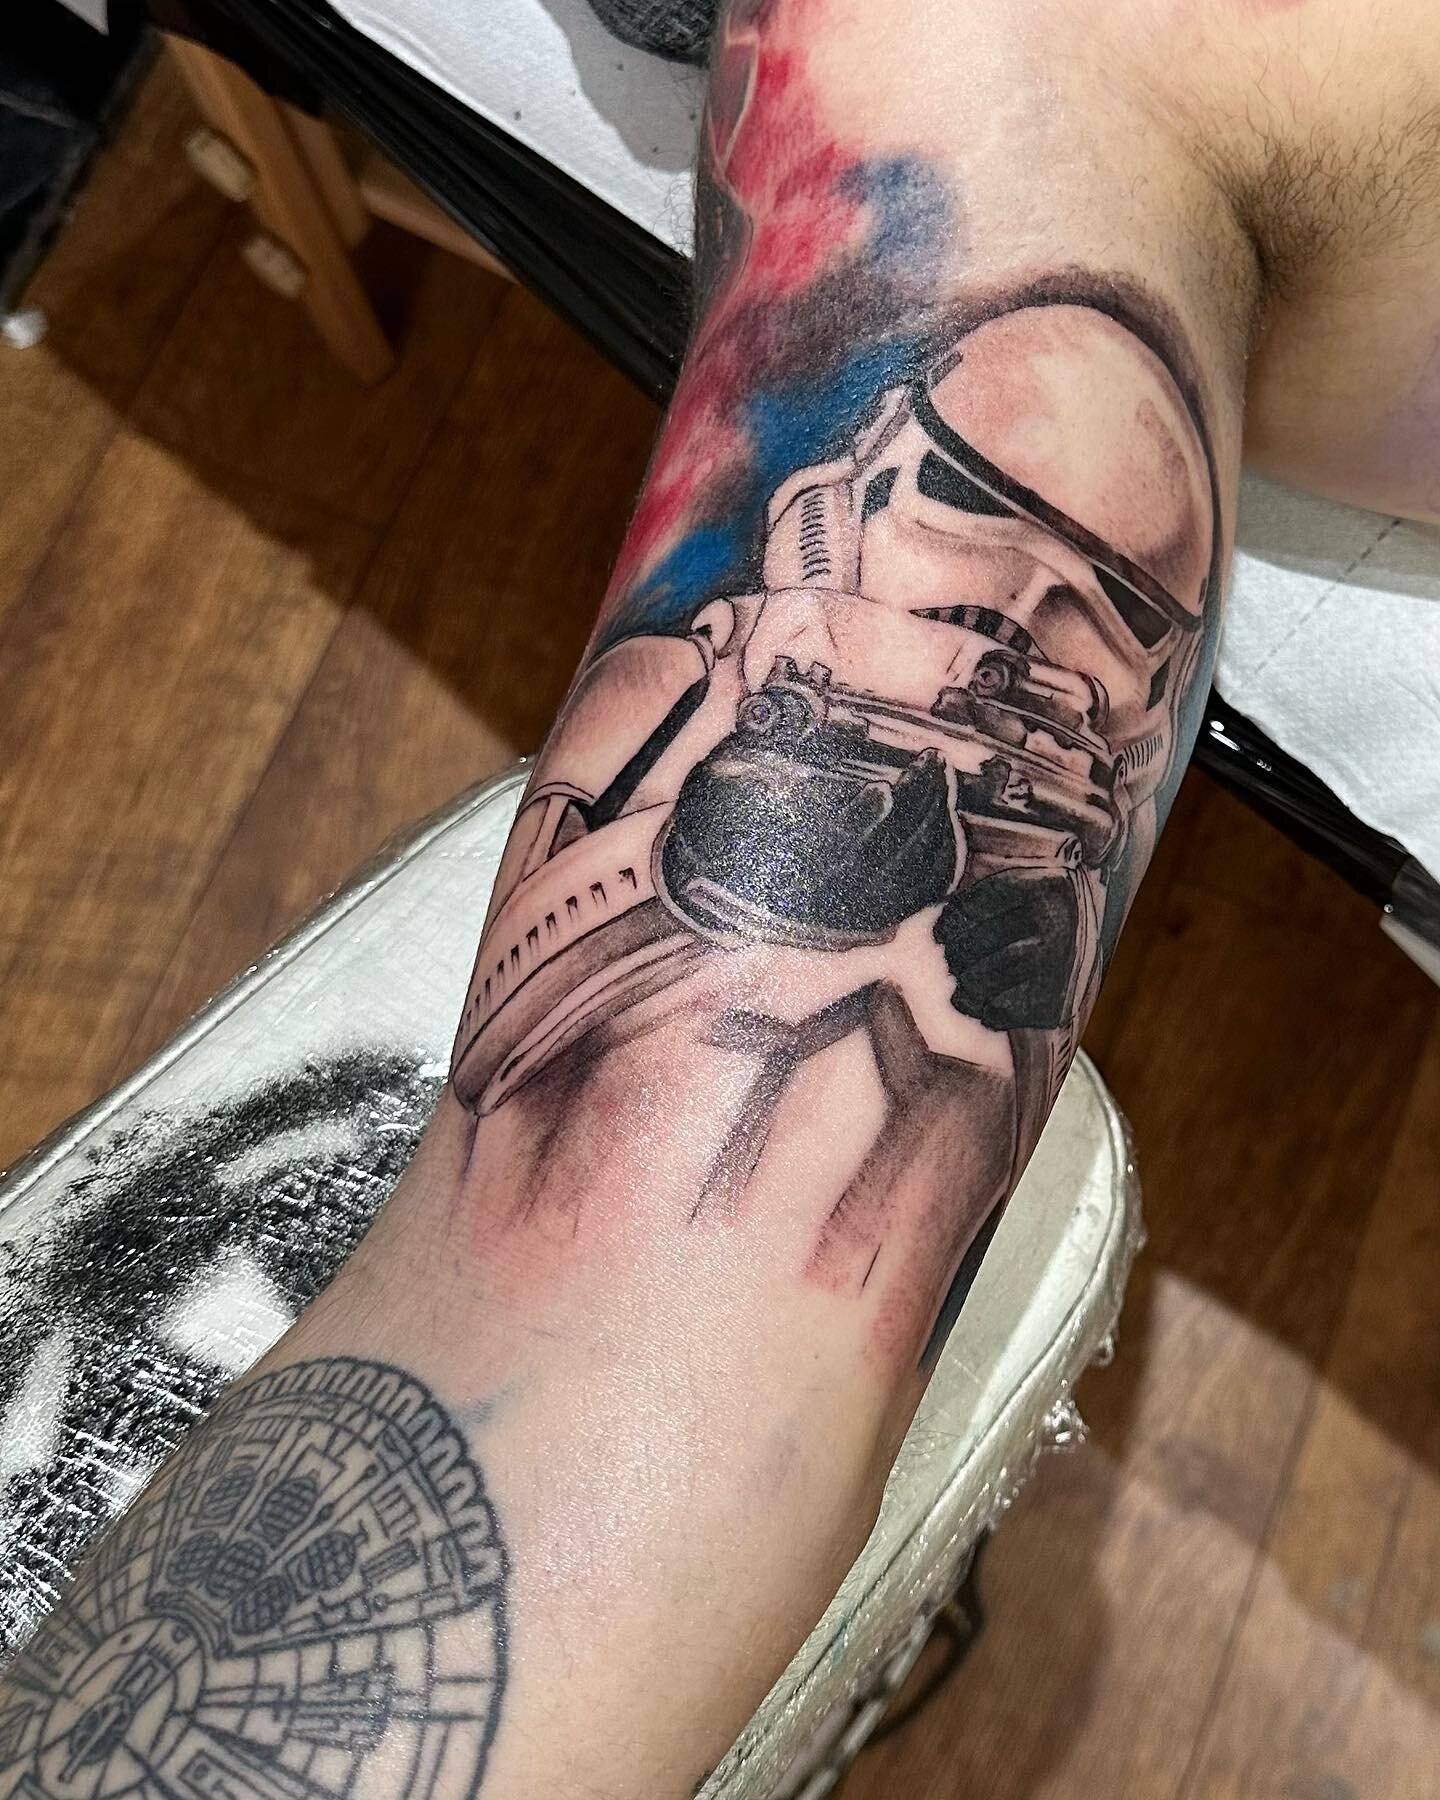 Added a Stormtrooper to @_gabesheen ongoing Star Wars sleeve today.